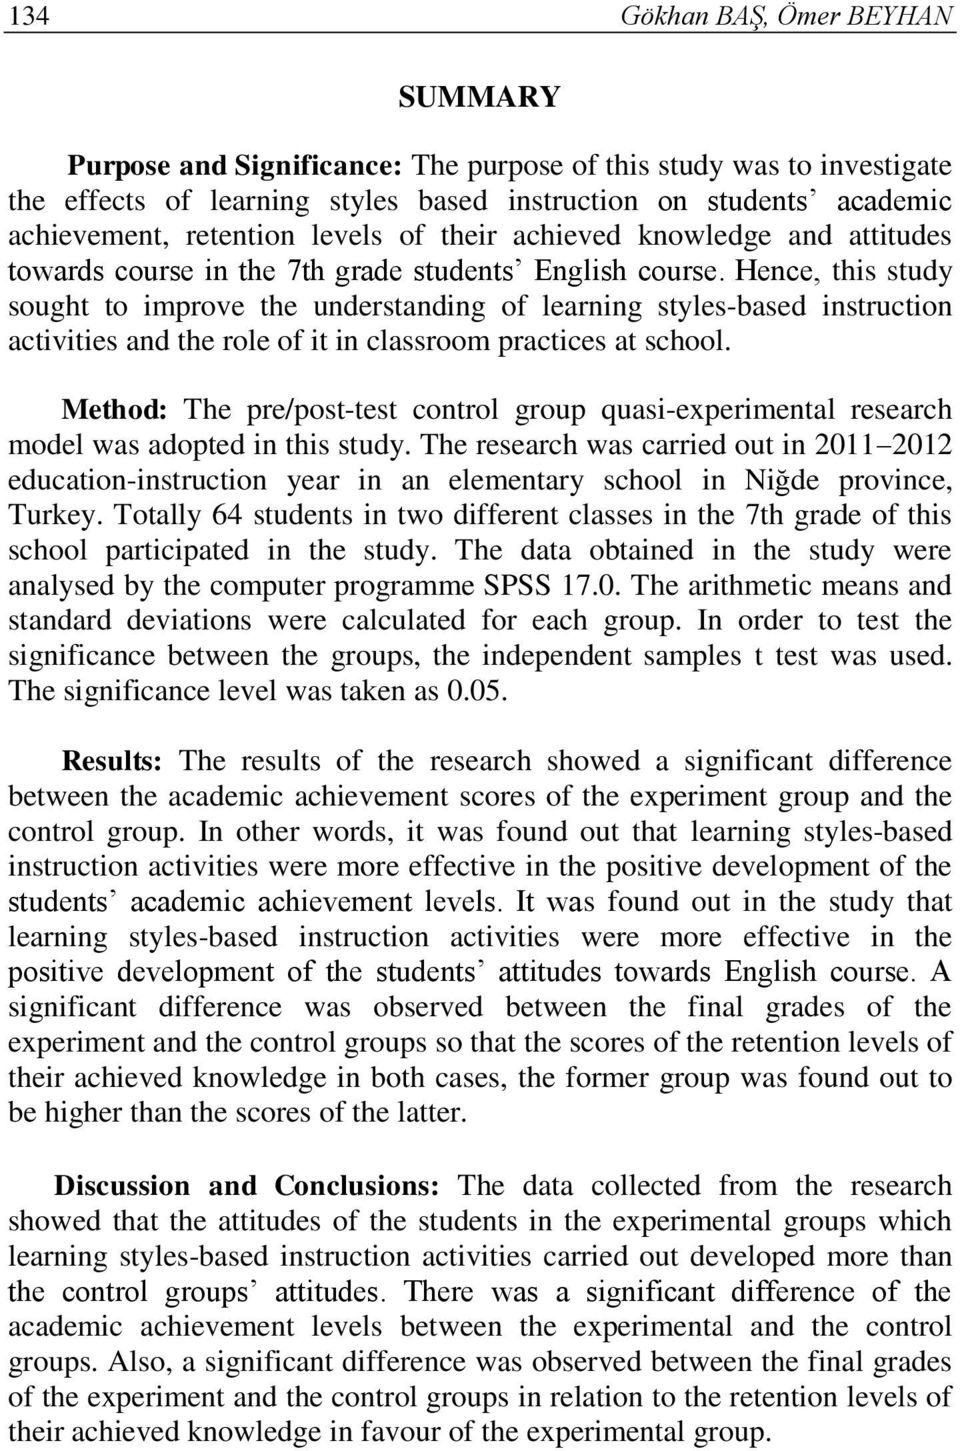 Hence, this study sought to improve the understanding of learning styles-based instruction activities and the role of it in classroom practices at school.